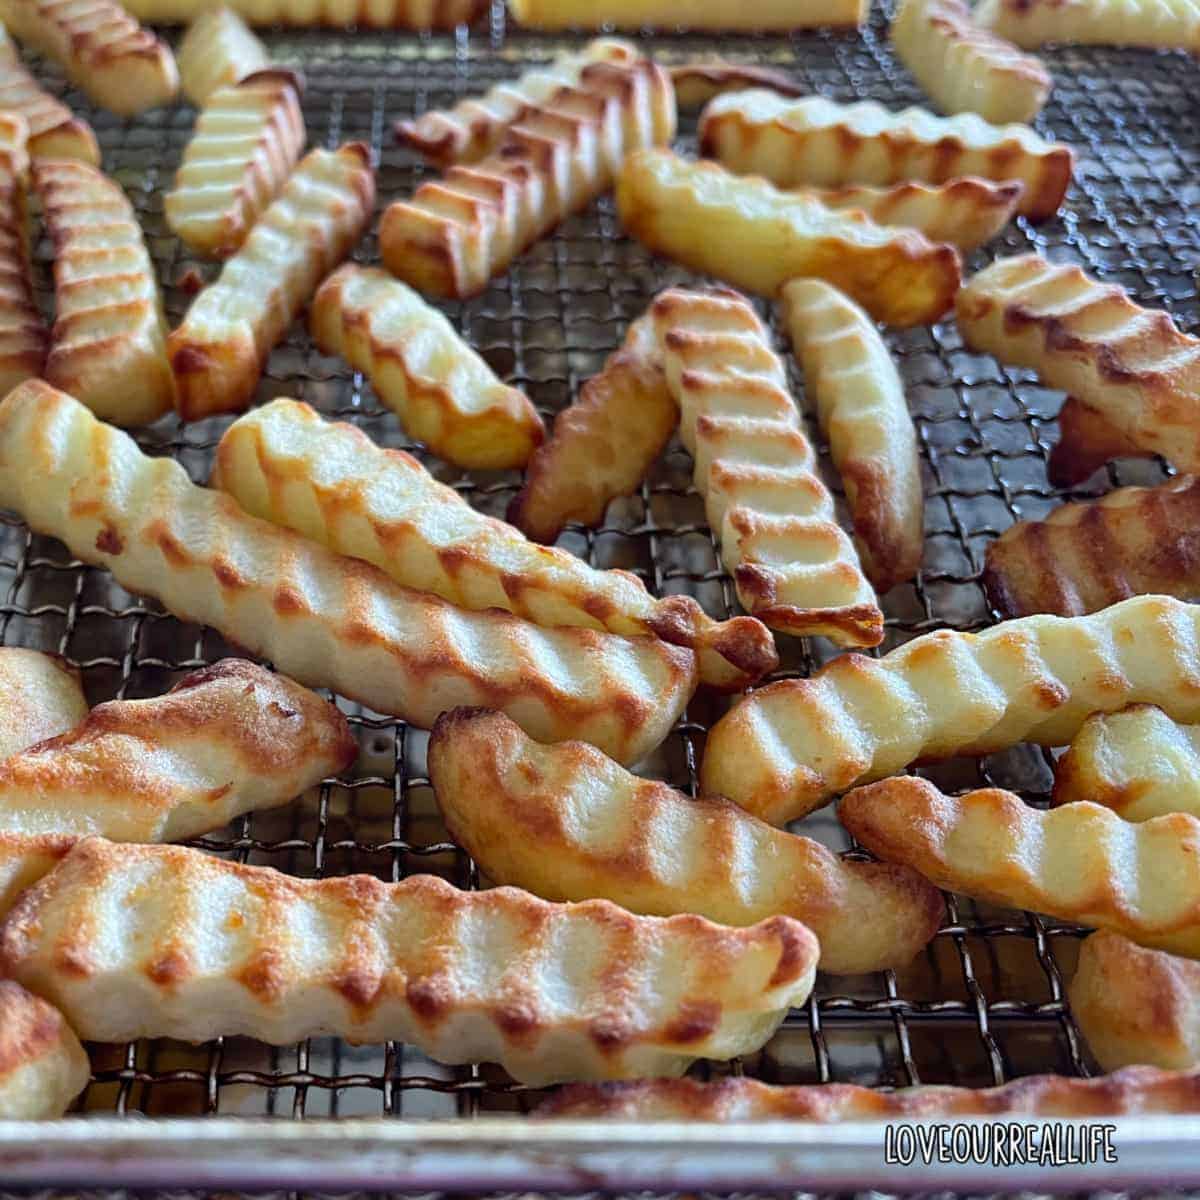 French fries that have been cooked to golden brown using an air fryer.